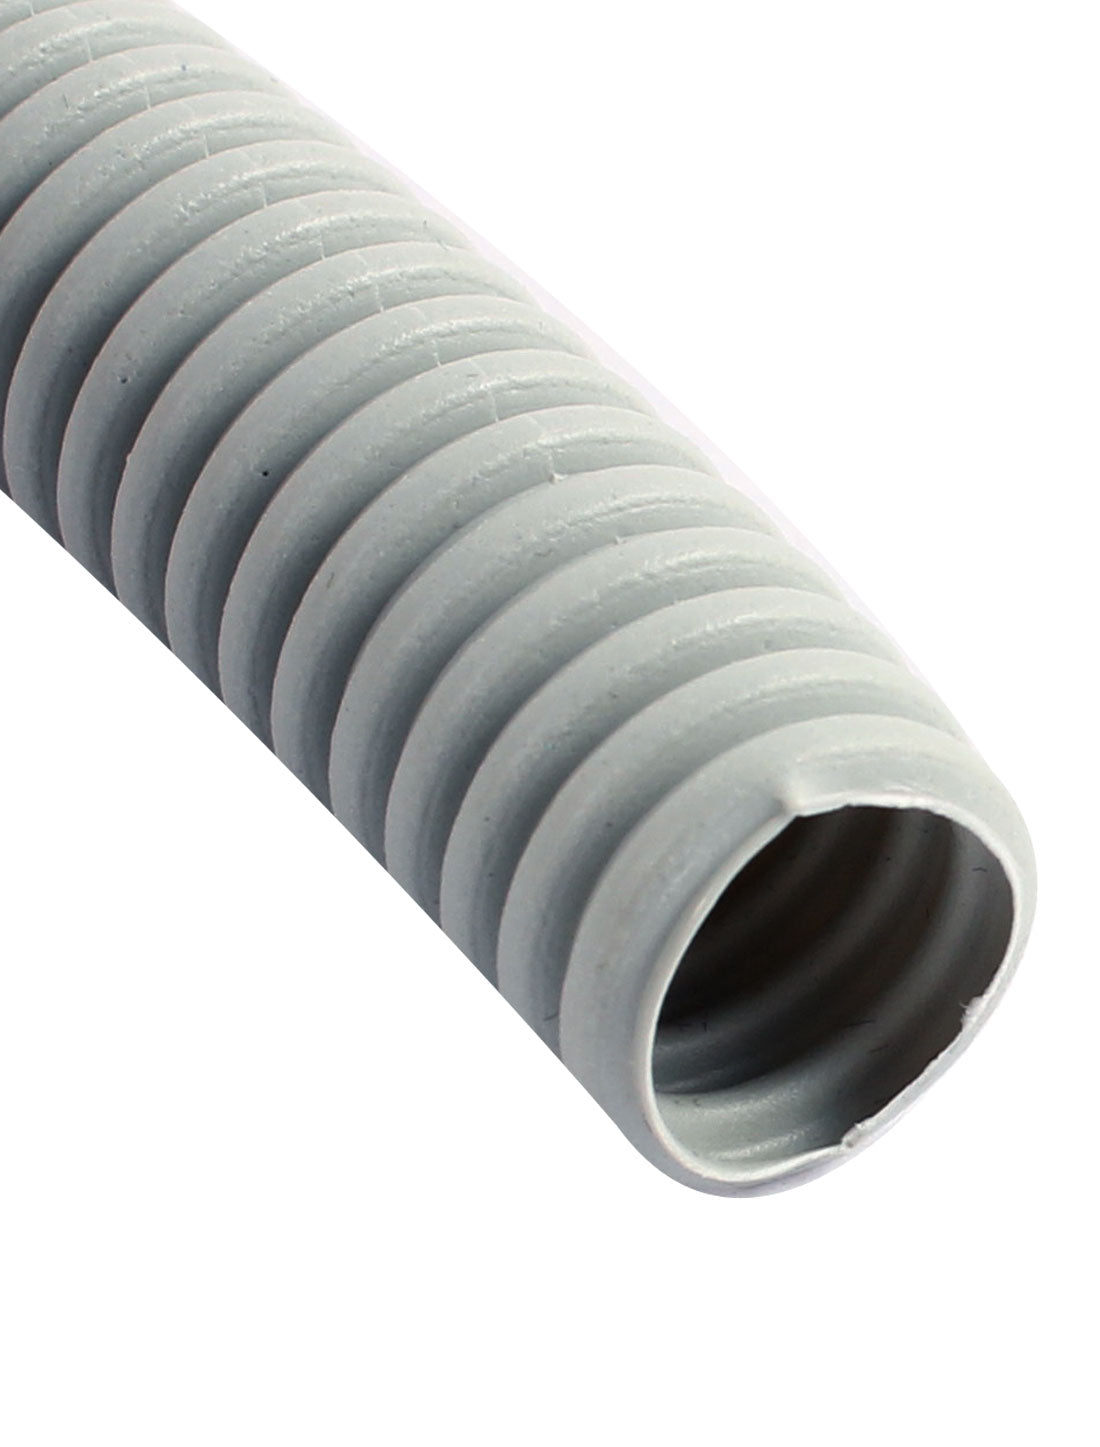 uxcell Uxcell 5 M 12 x 16 mm Plastic Flexible Corrugated Conduit Tube for Garden,Office Gray